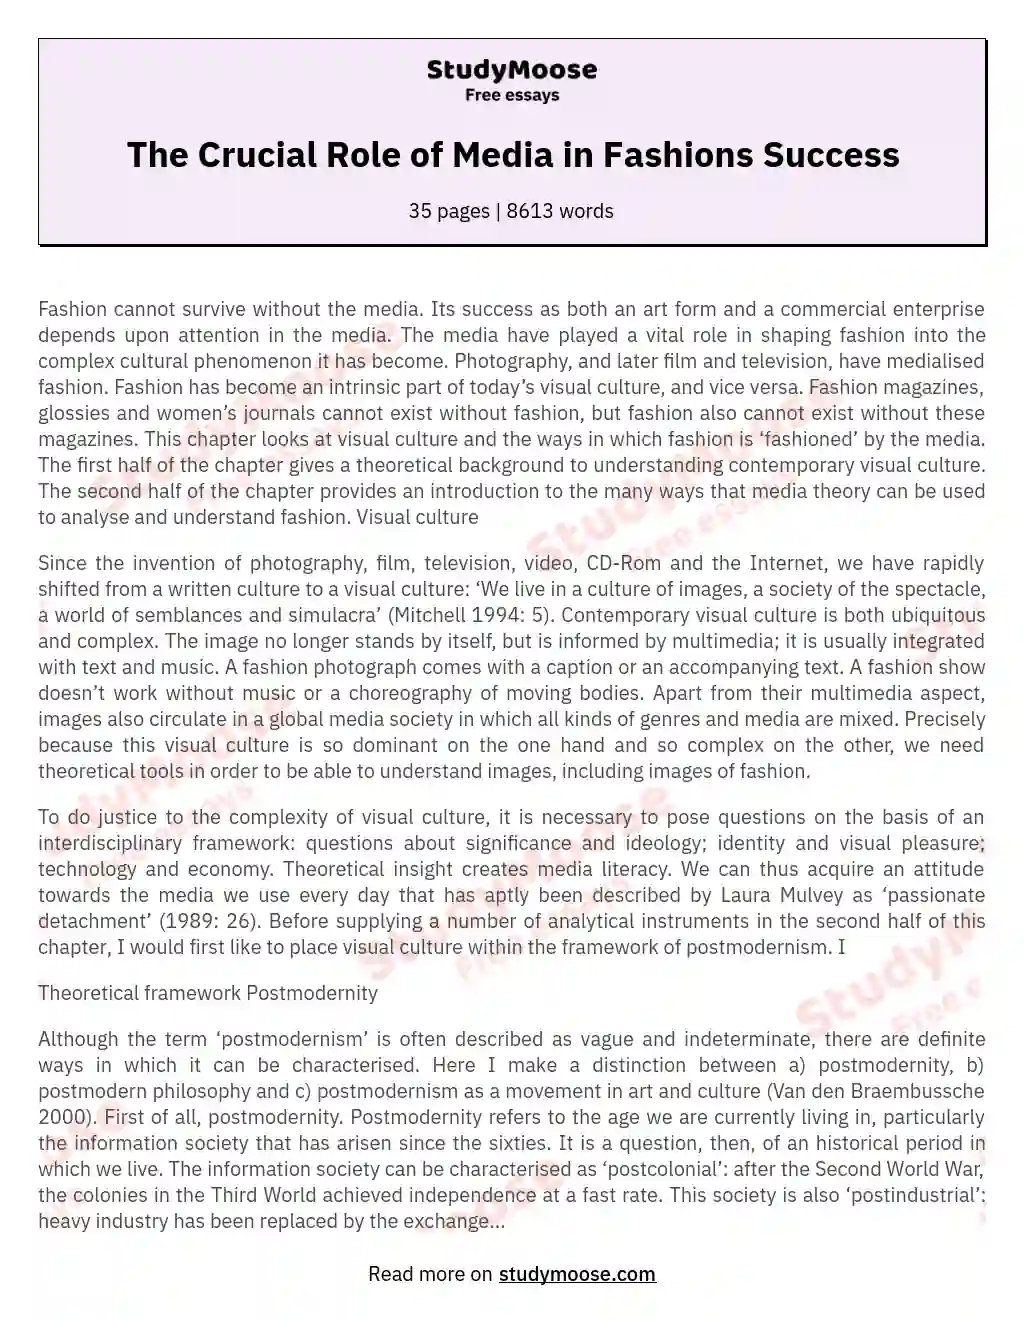 The Crucial Role of Media in Fashions Success essay